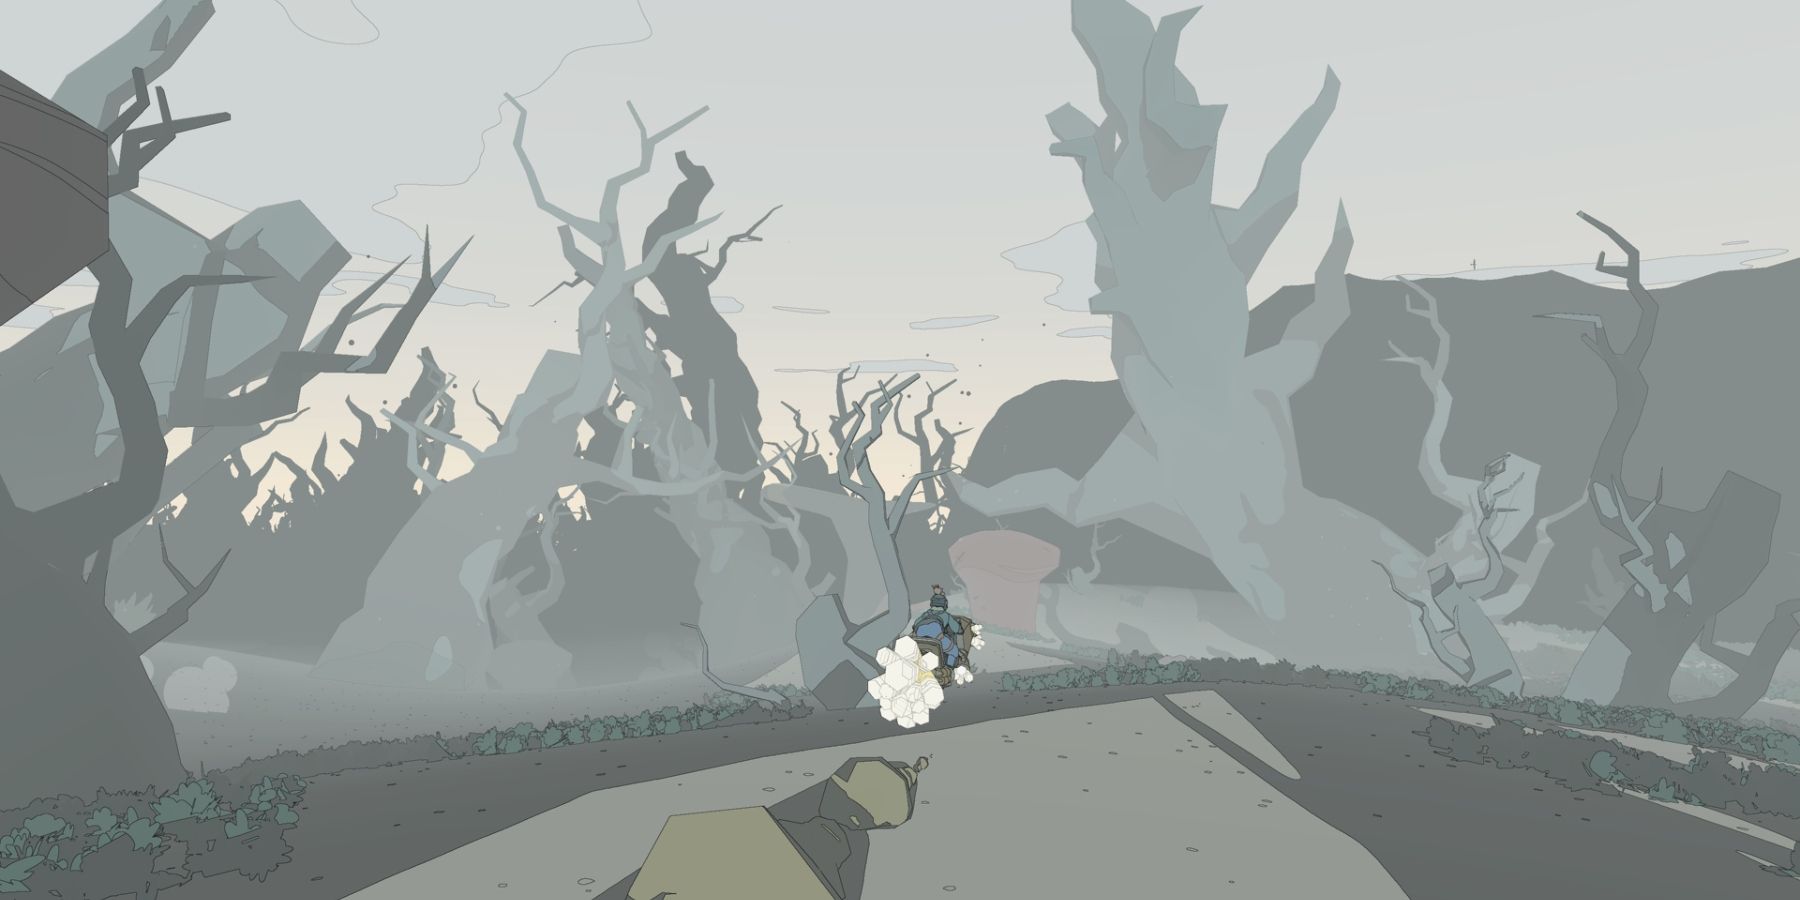 Sable driving jetbike through a foggy forest of dead-looking trees